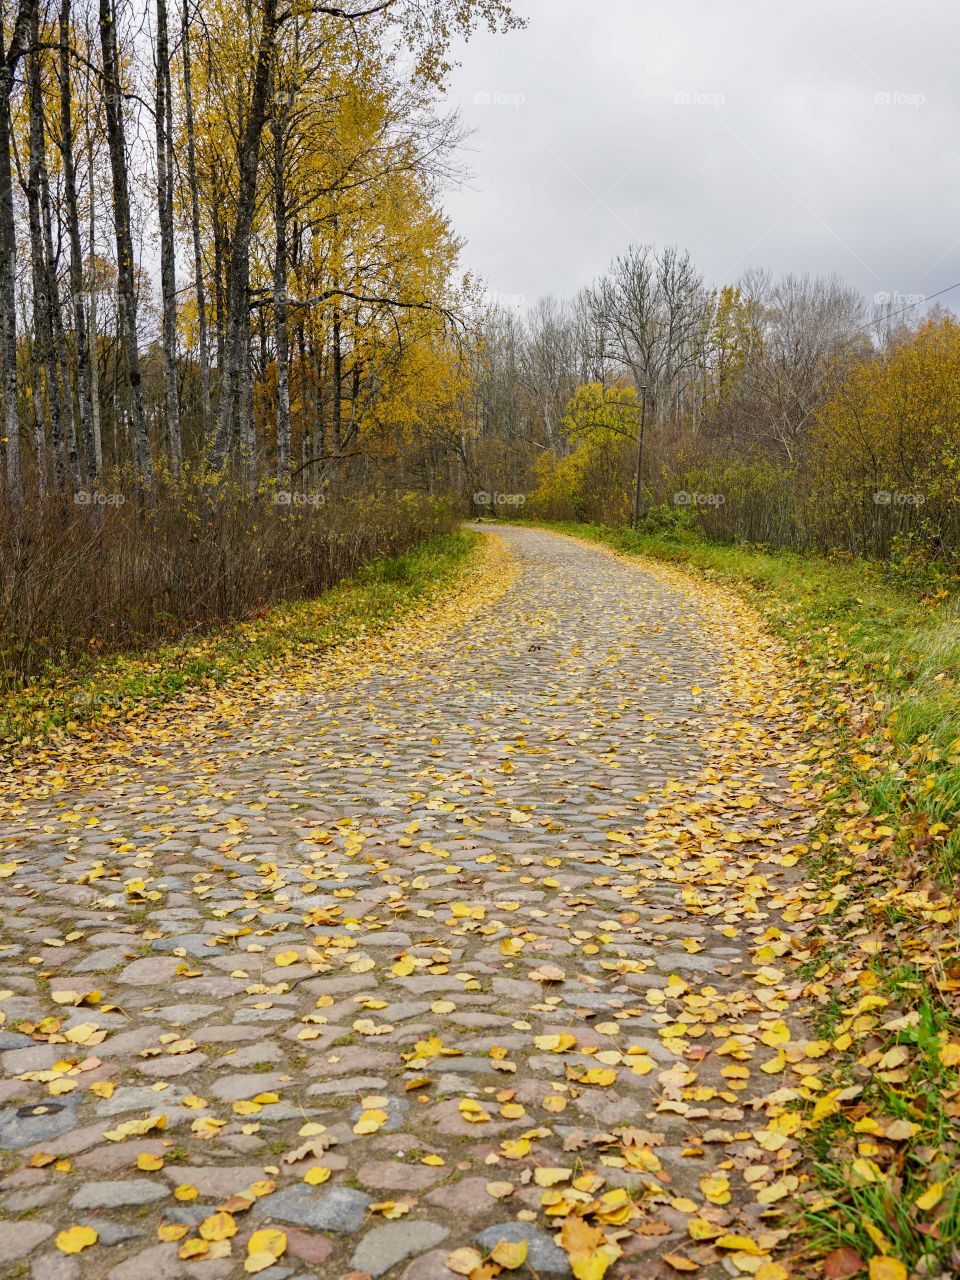 an old paved curved road covered with yellow leaves in the autumn